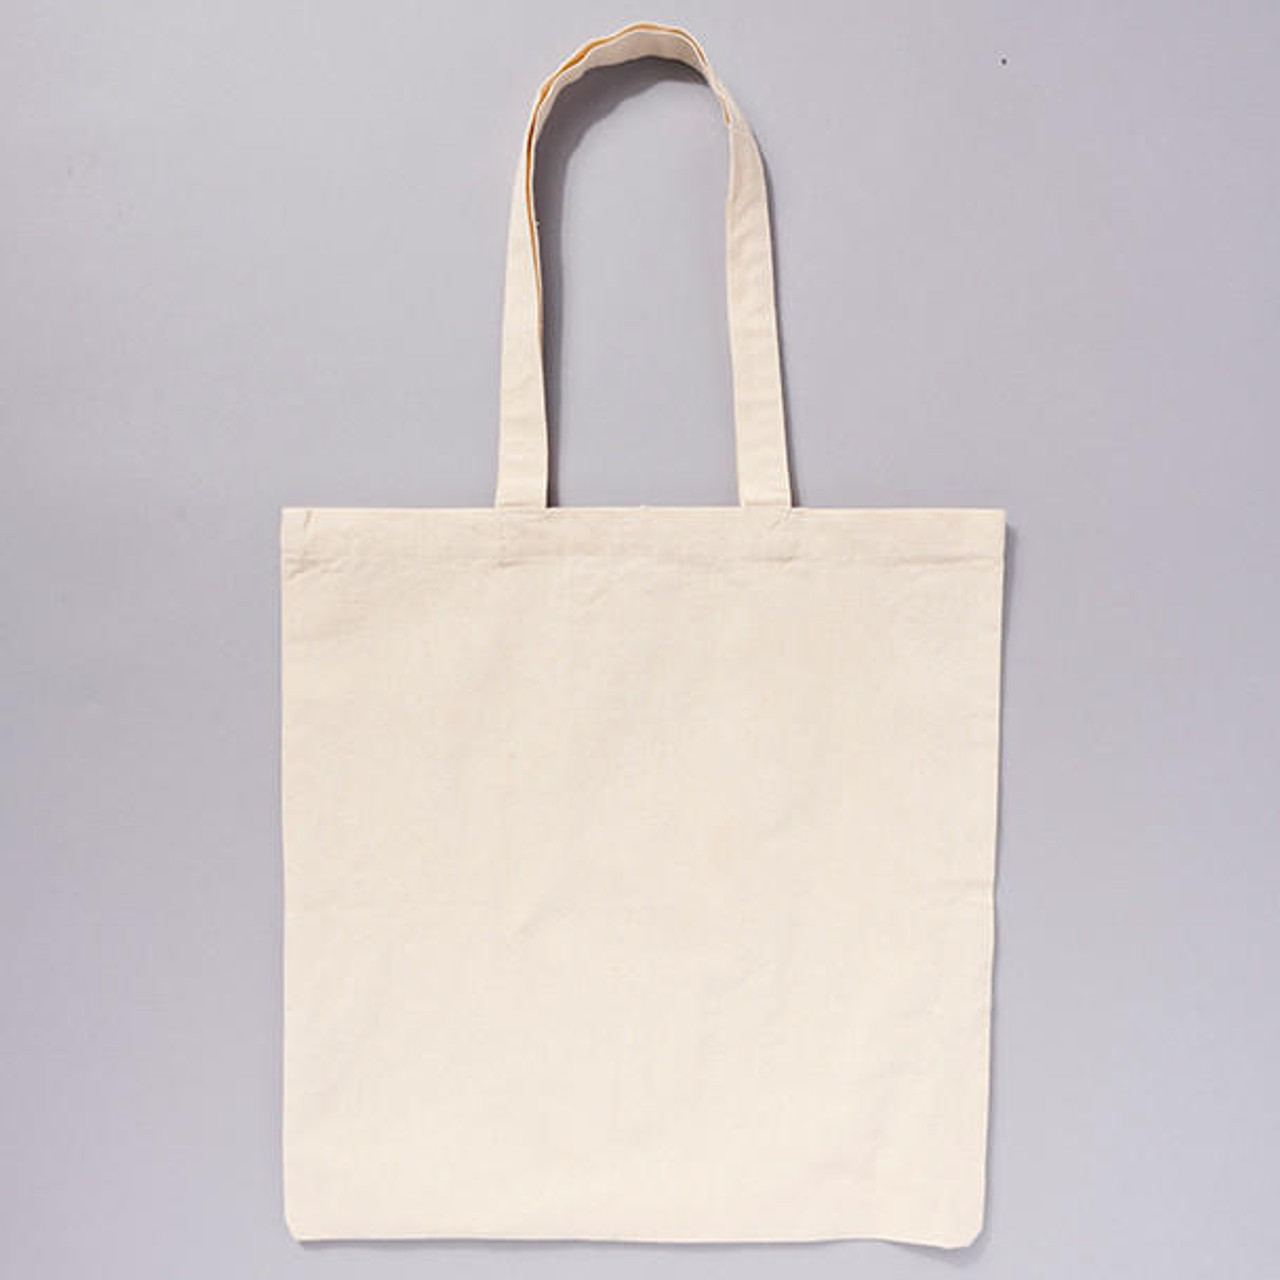 Things You Need To Know About PP Non-Woven Bags